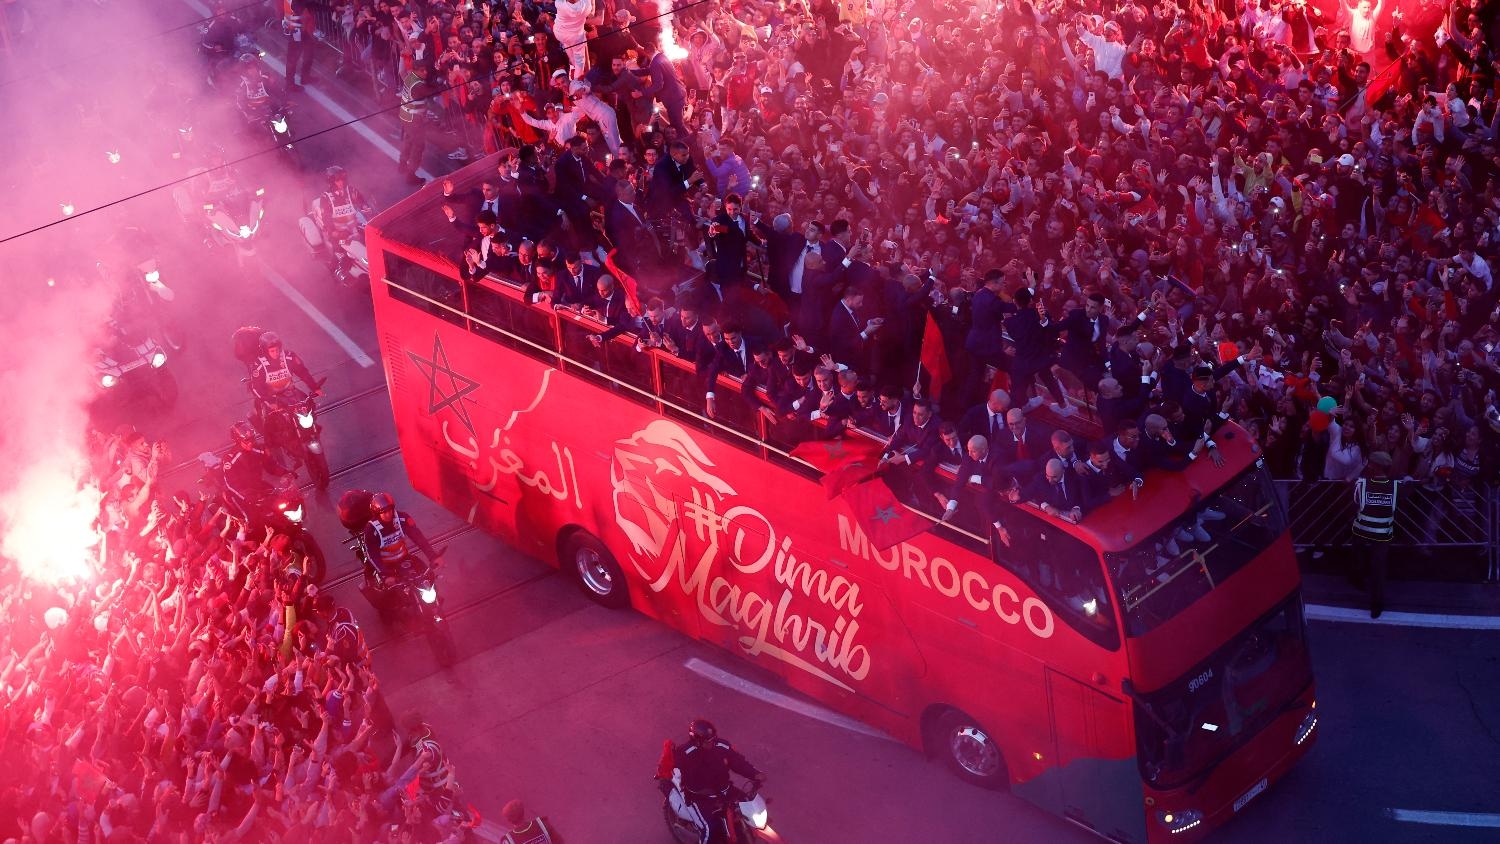 Morocco players on a bus touring the streets of Rabat as Morocco fans celebrate with flares during the parade on 20 December 2022.